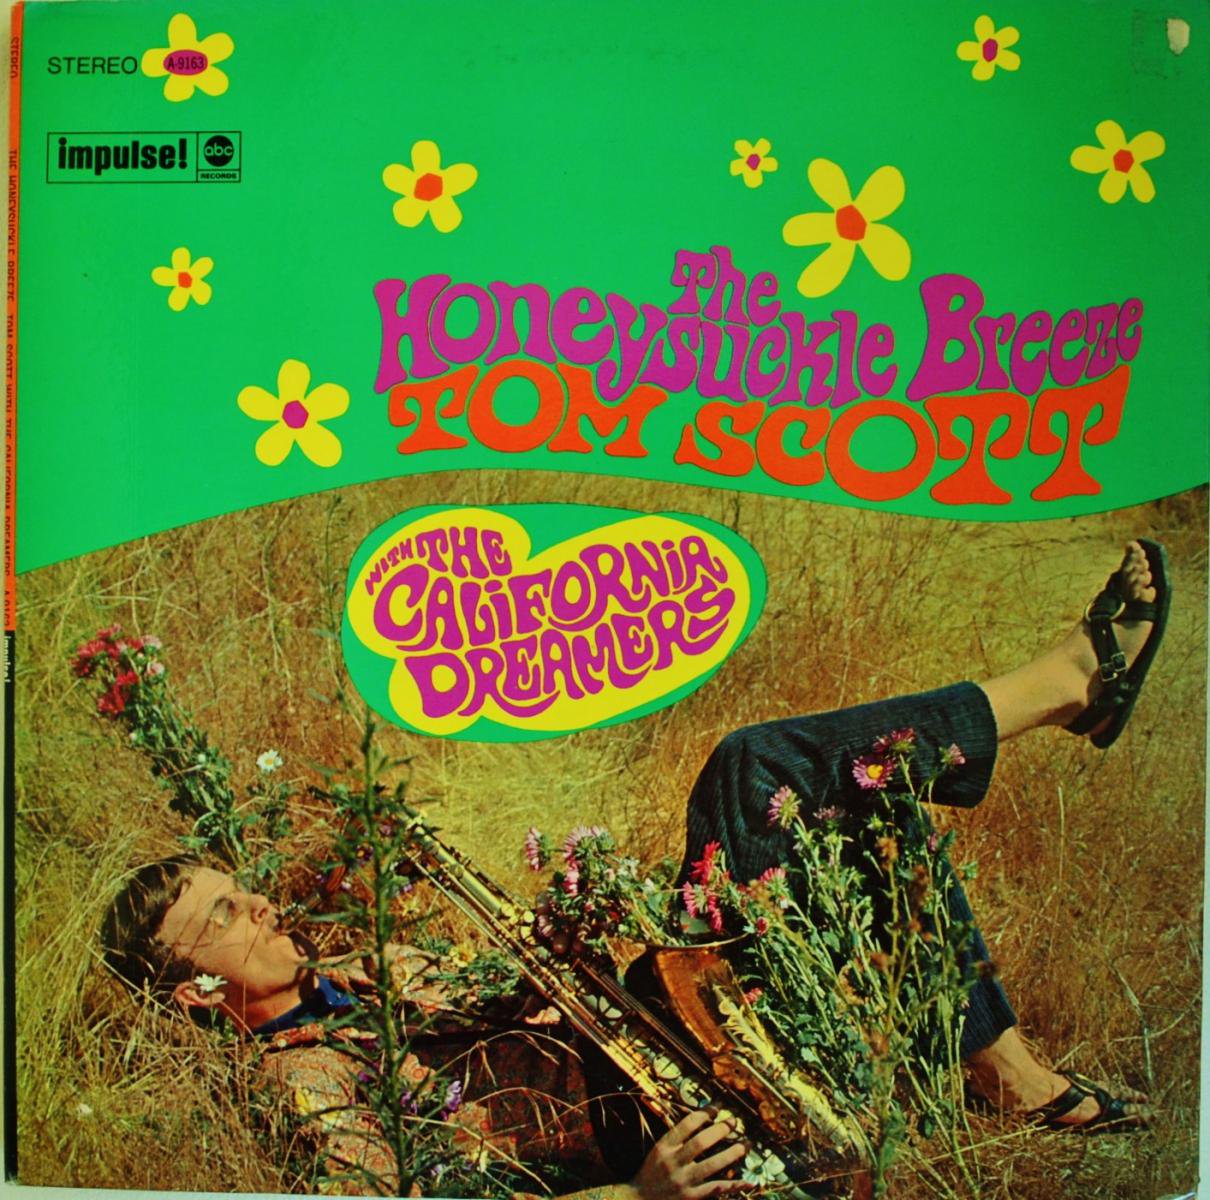 TOM SCOTT WITH THE CALIFORNIA DREAMERS / THE HONEYSUCKLE BREEZE (LP)